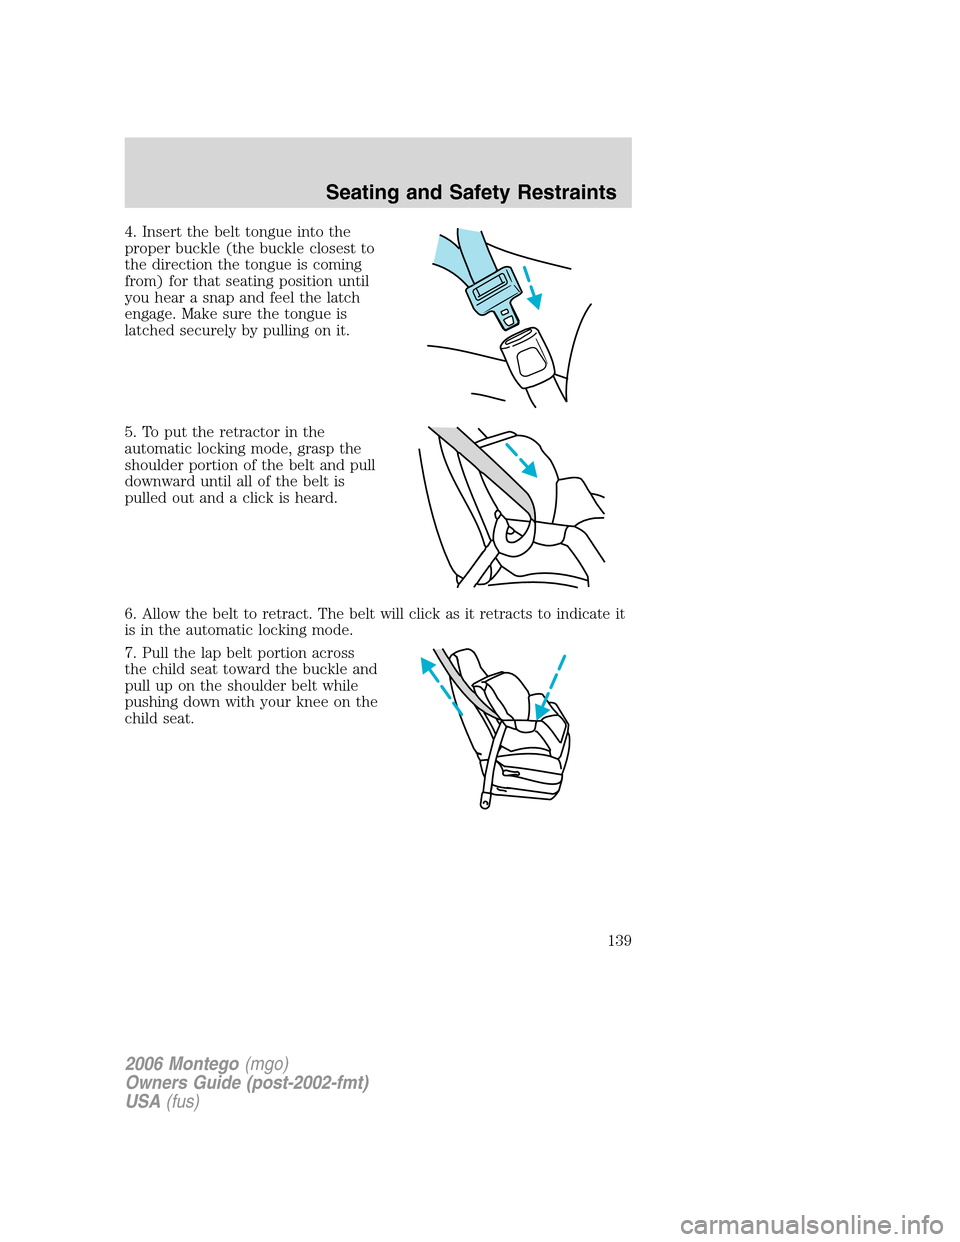 Mercury Montego 2006  Owners Manuals 4. Insert the belt tongue into the
proper buckle (the buckle closest to
the direction the tongue is coming
from) for that seating position until
you hear a snap and feel the latch
engage. Make sure th